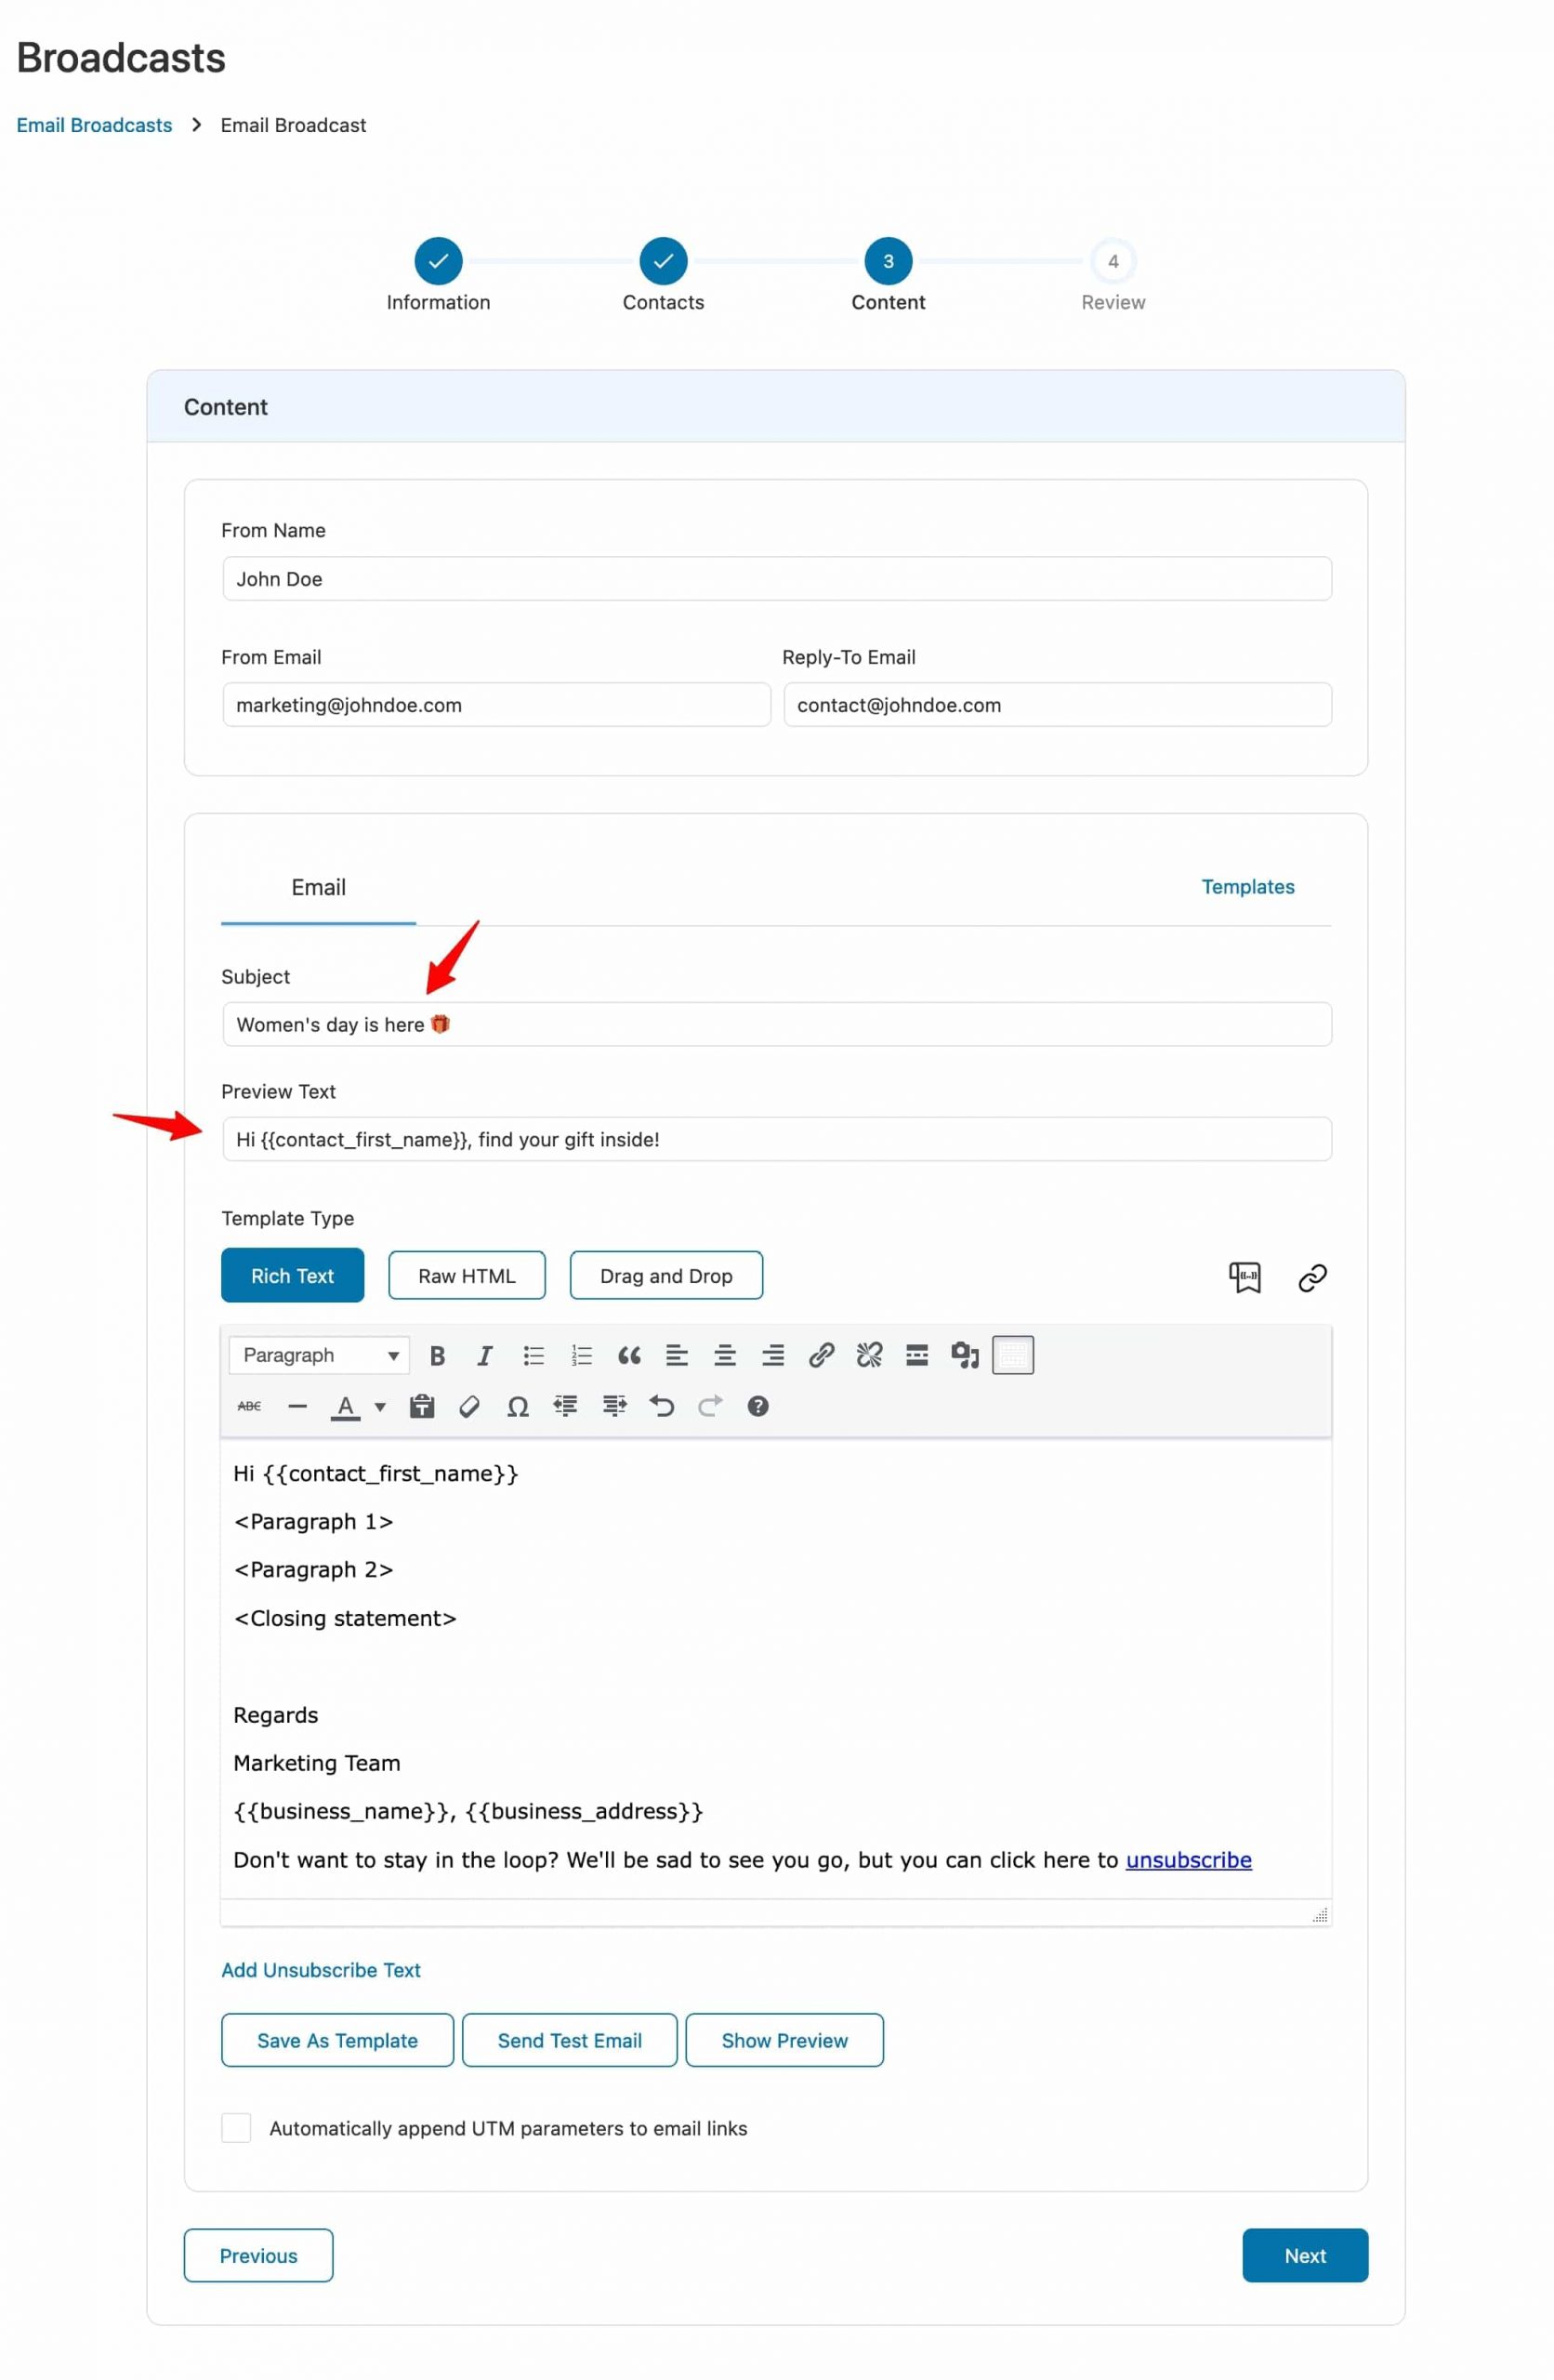 Setting up subject line, preheader and email body in broadcast campaigns with FunnelKit Automations